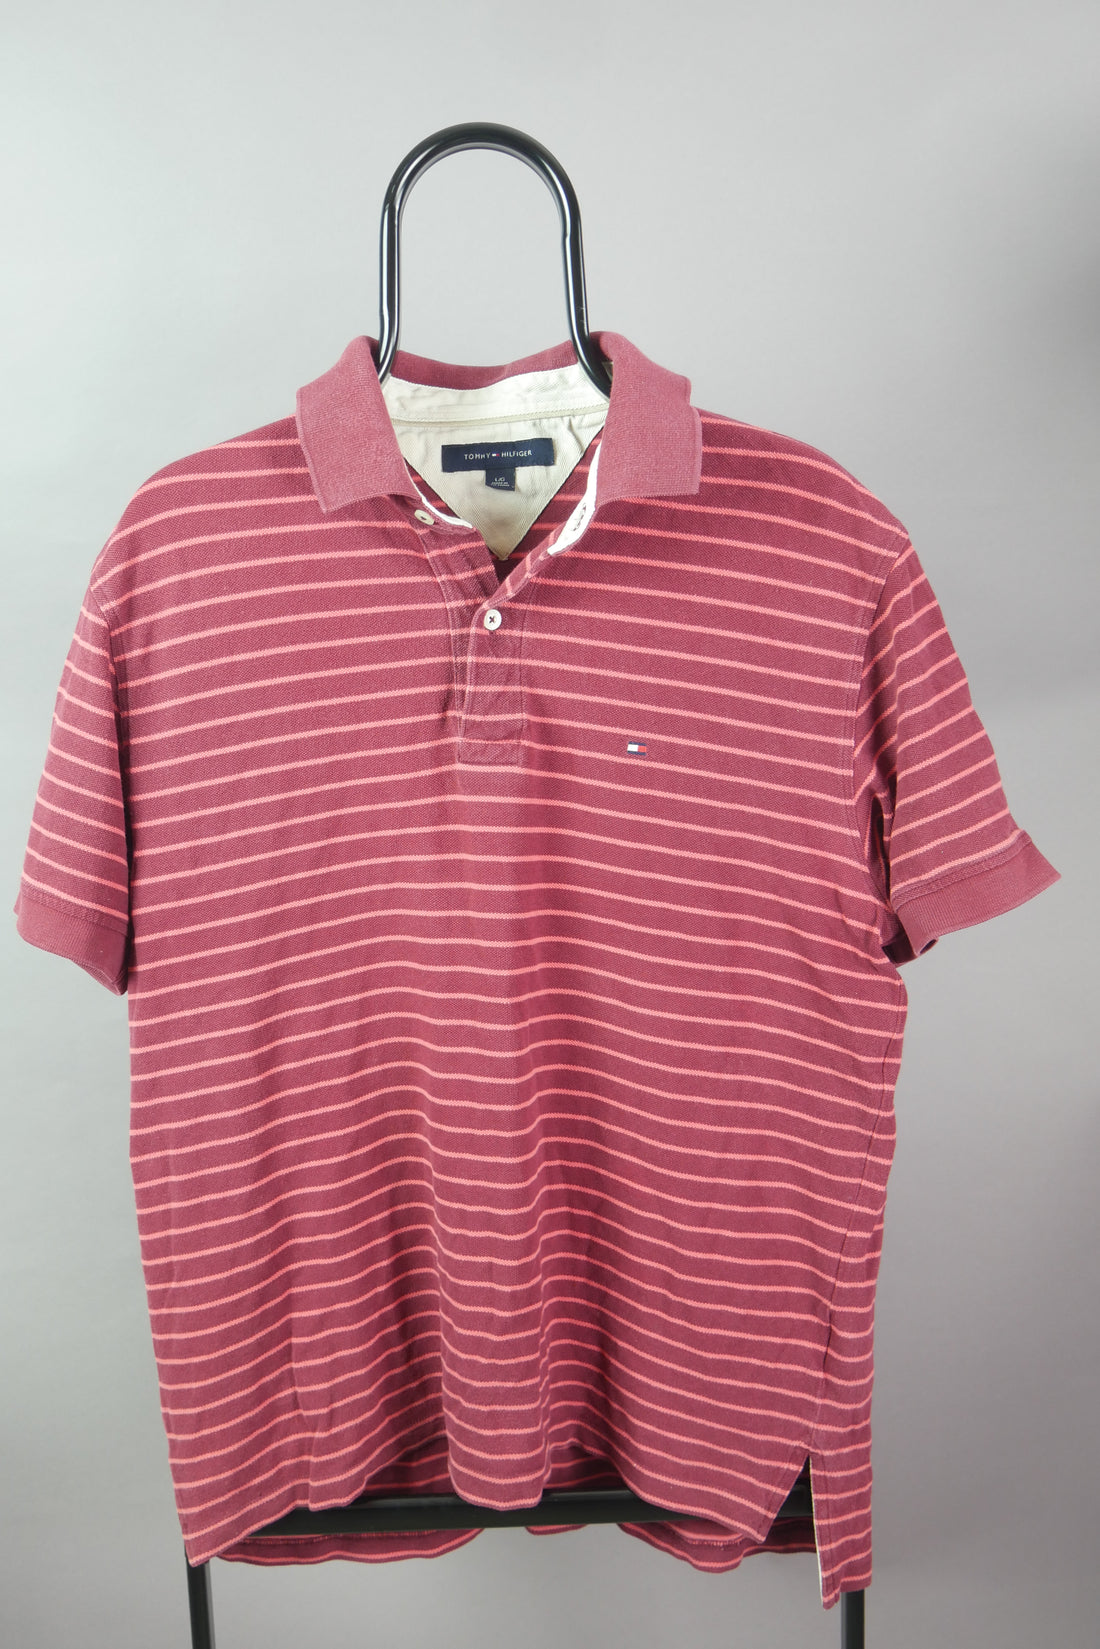 The Striped Tommy Hilfiger Polo Shirt (L)